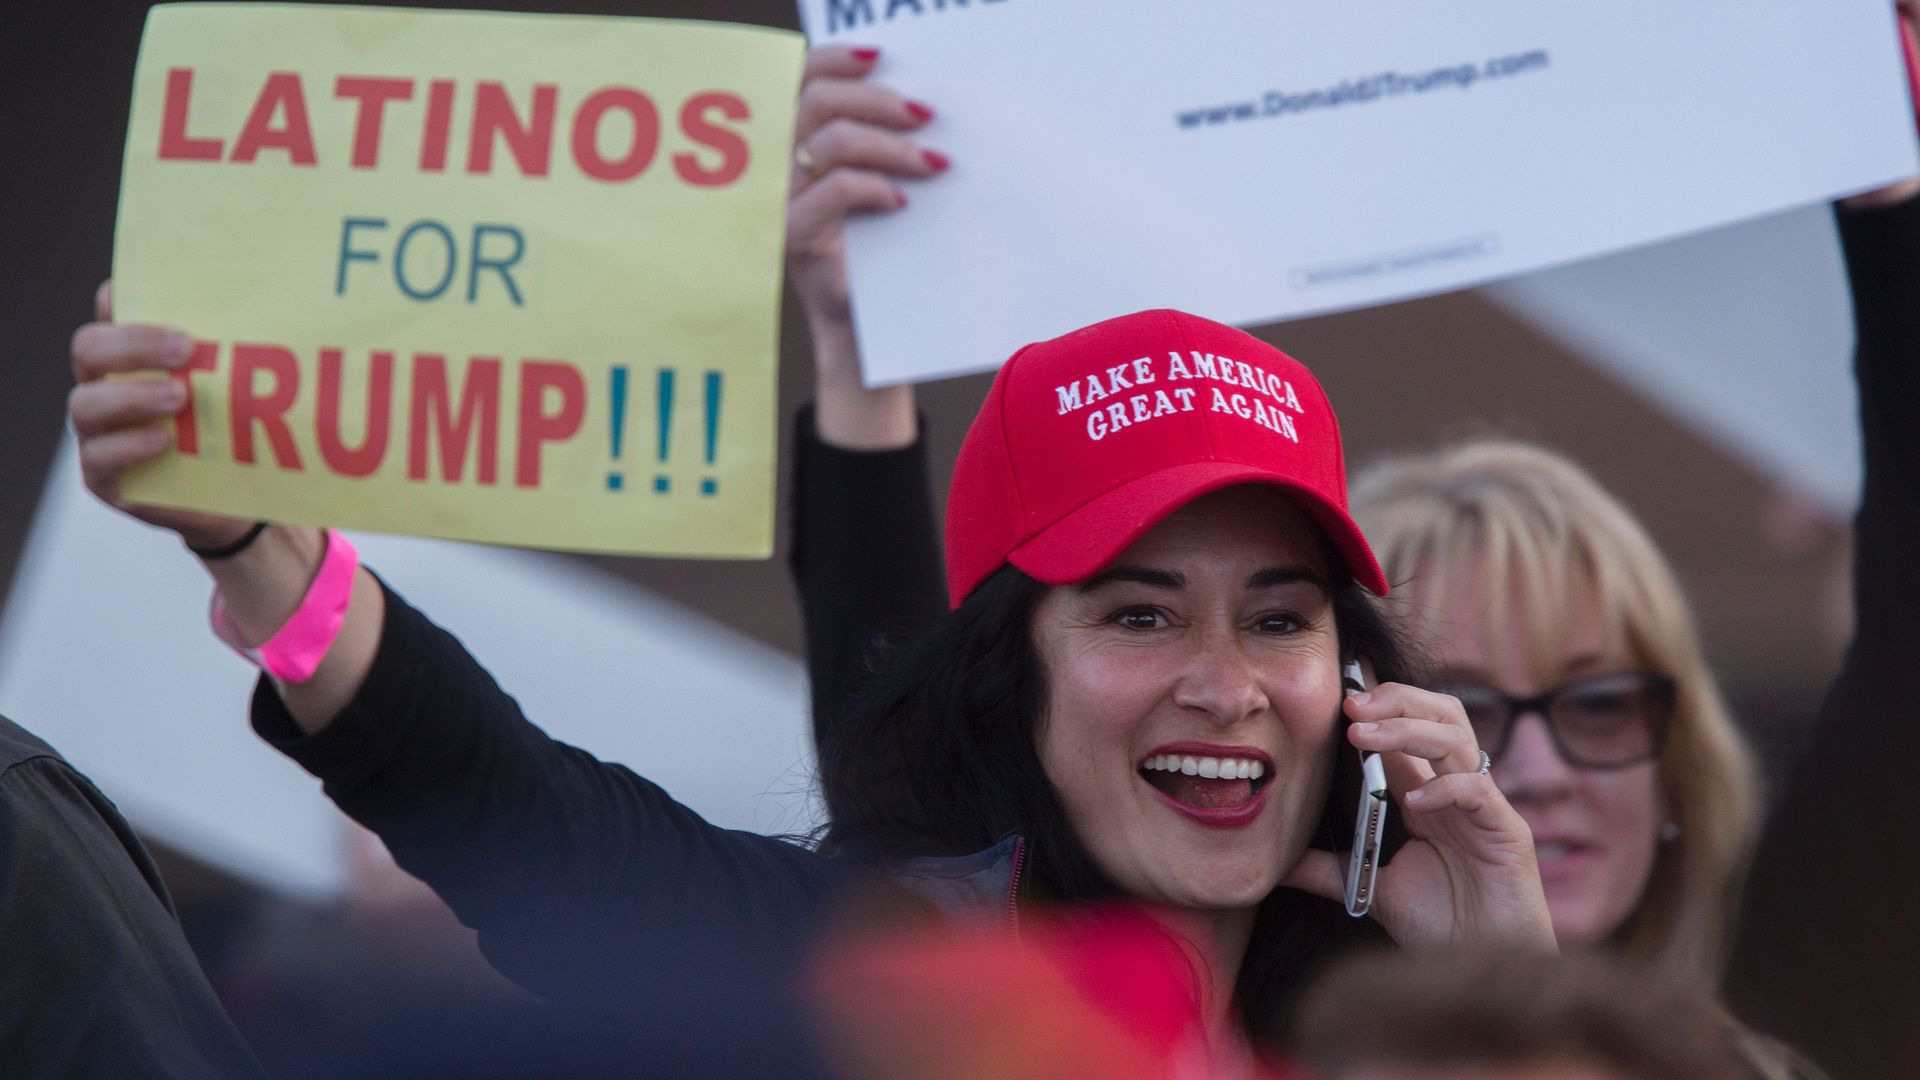 A woman holds a "Latinos for Trump" sign